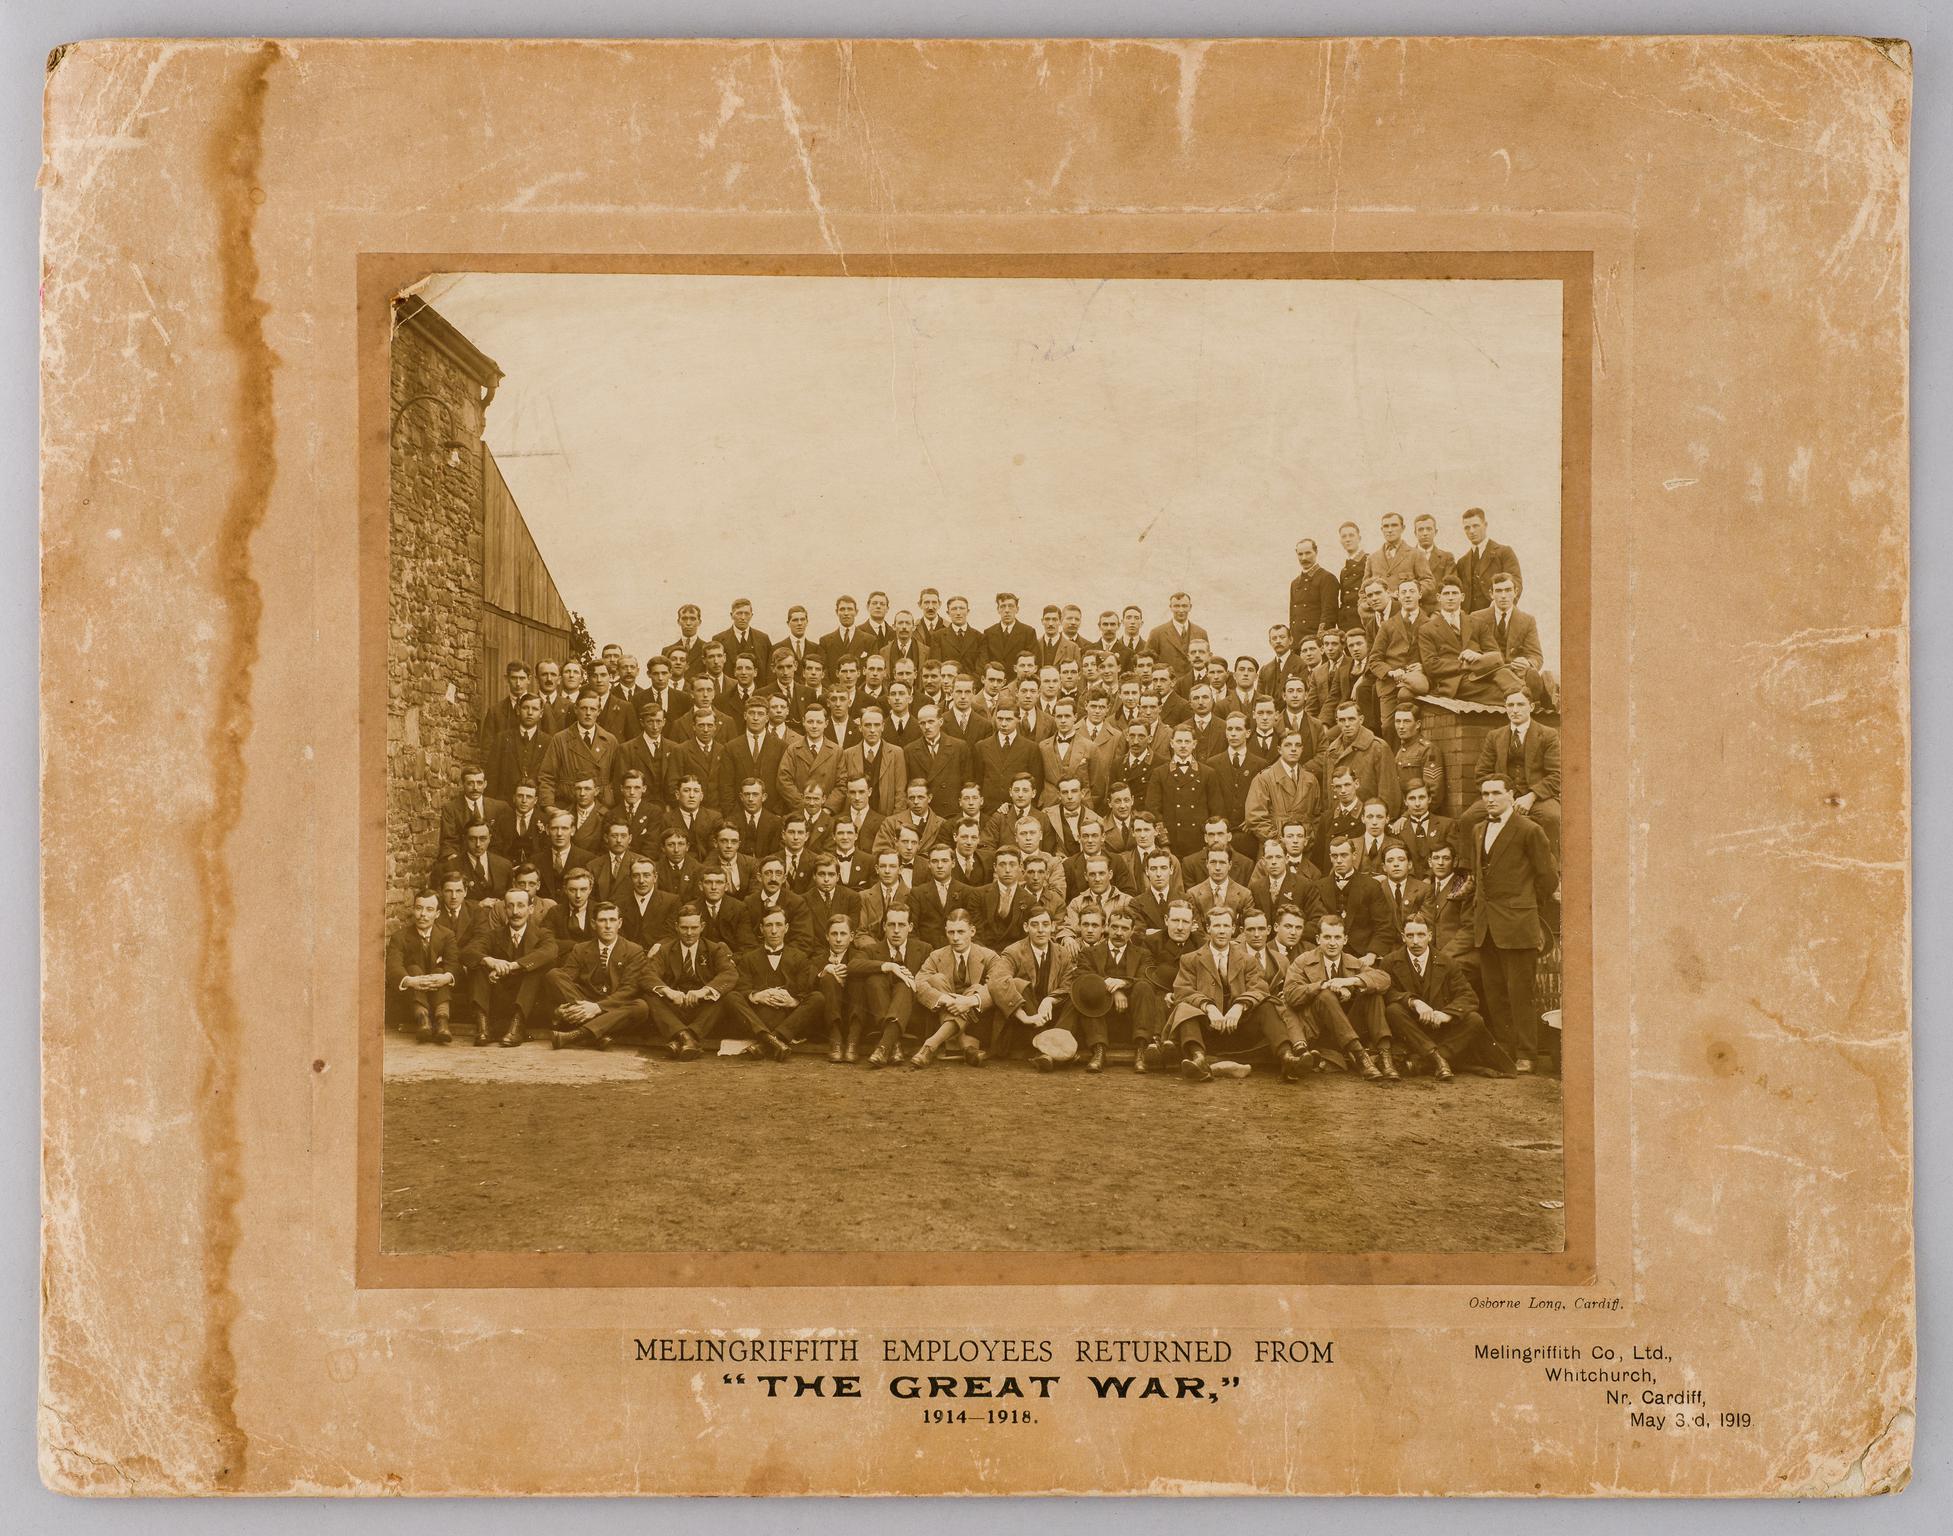 Melingriffith Employees Returned from "The Great War", 1914-1918 (photograph)